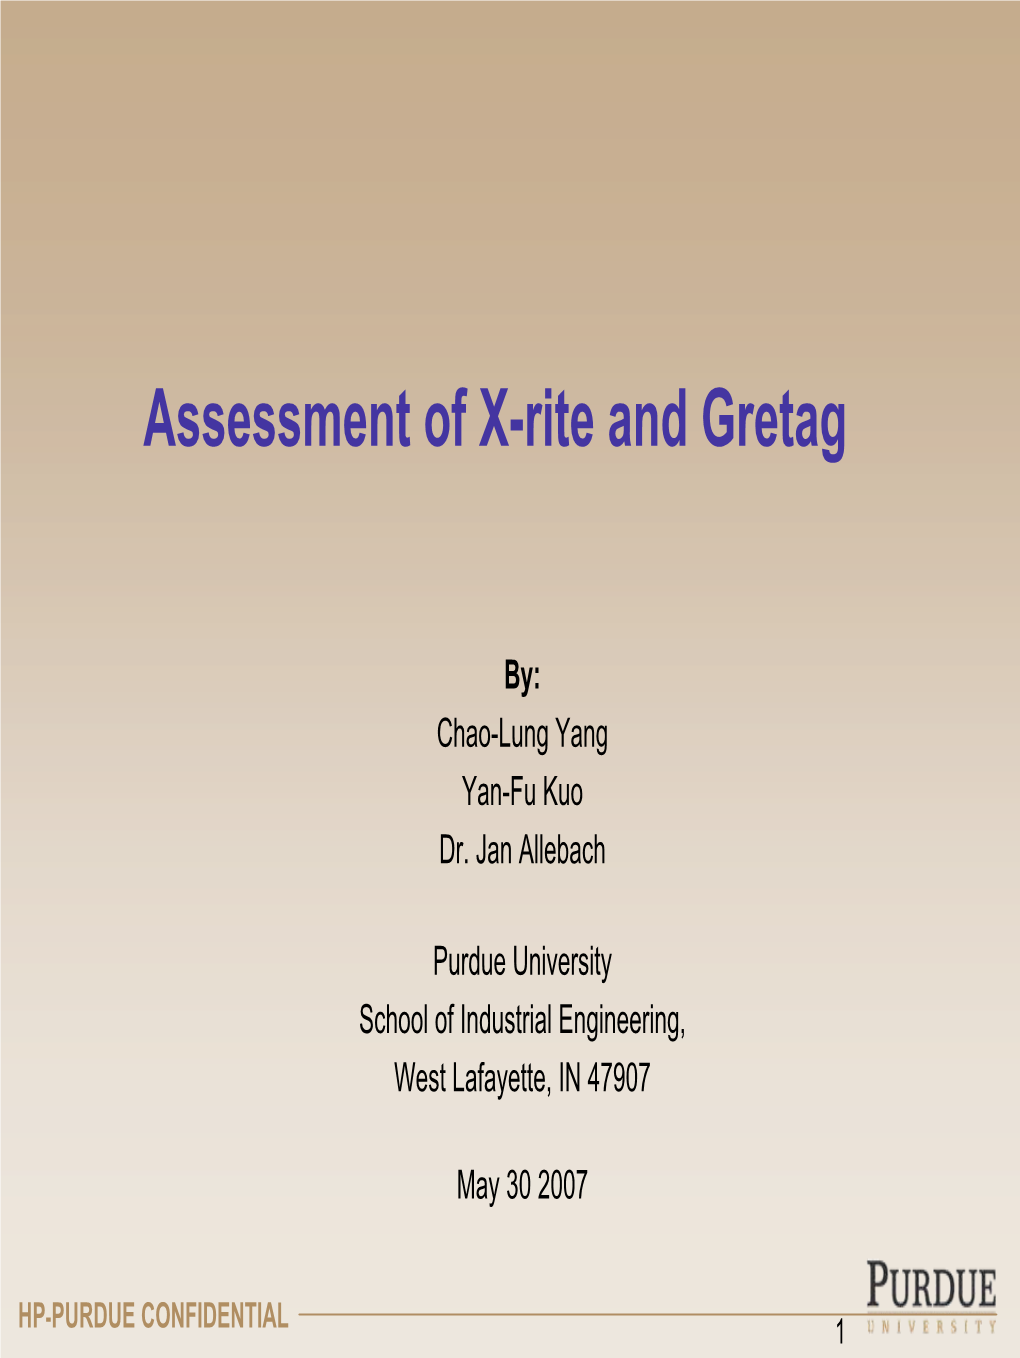 Assessment of X-Rite and Gretag